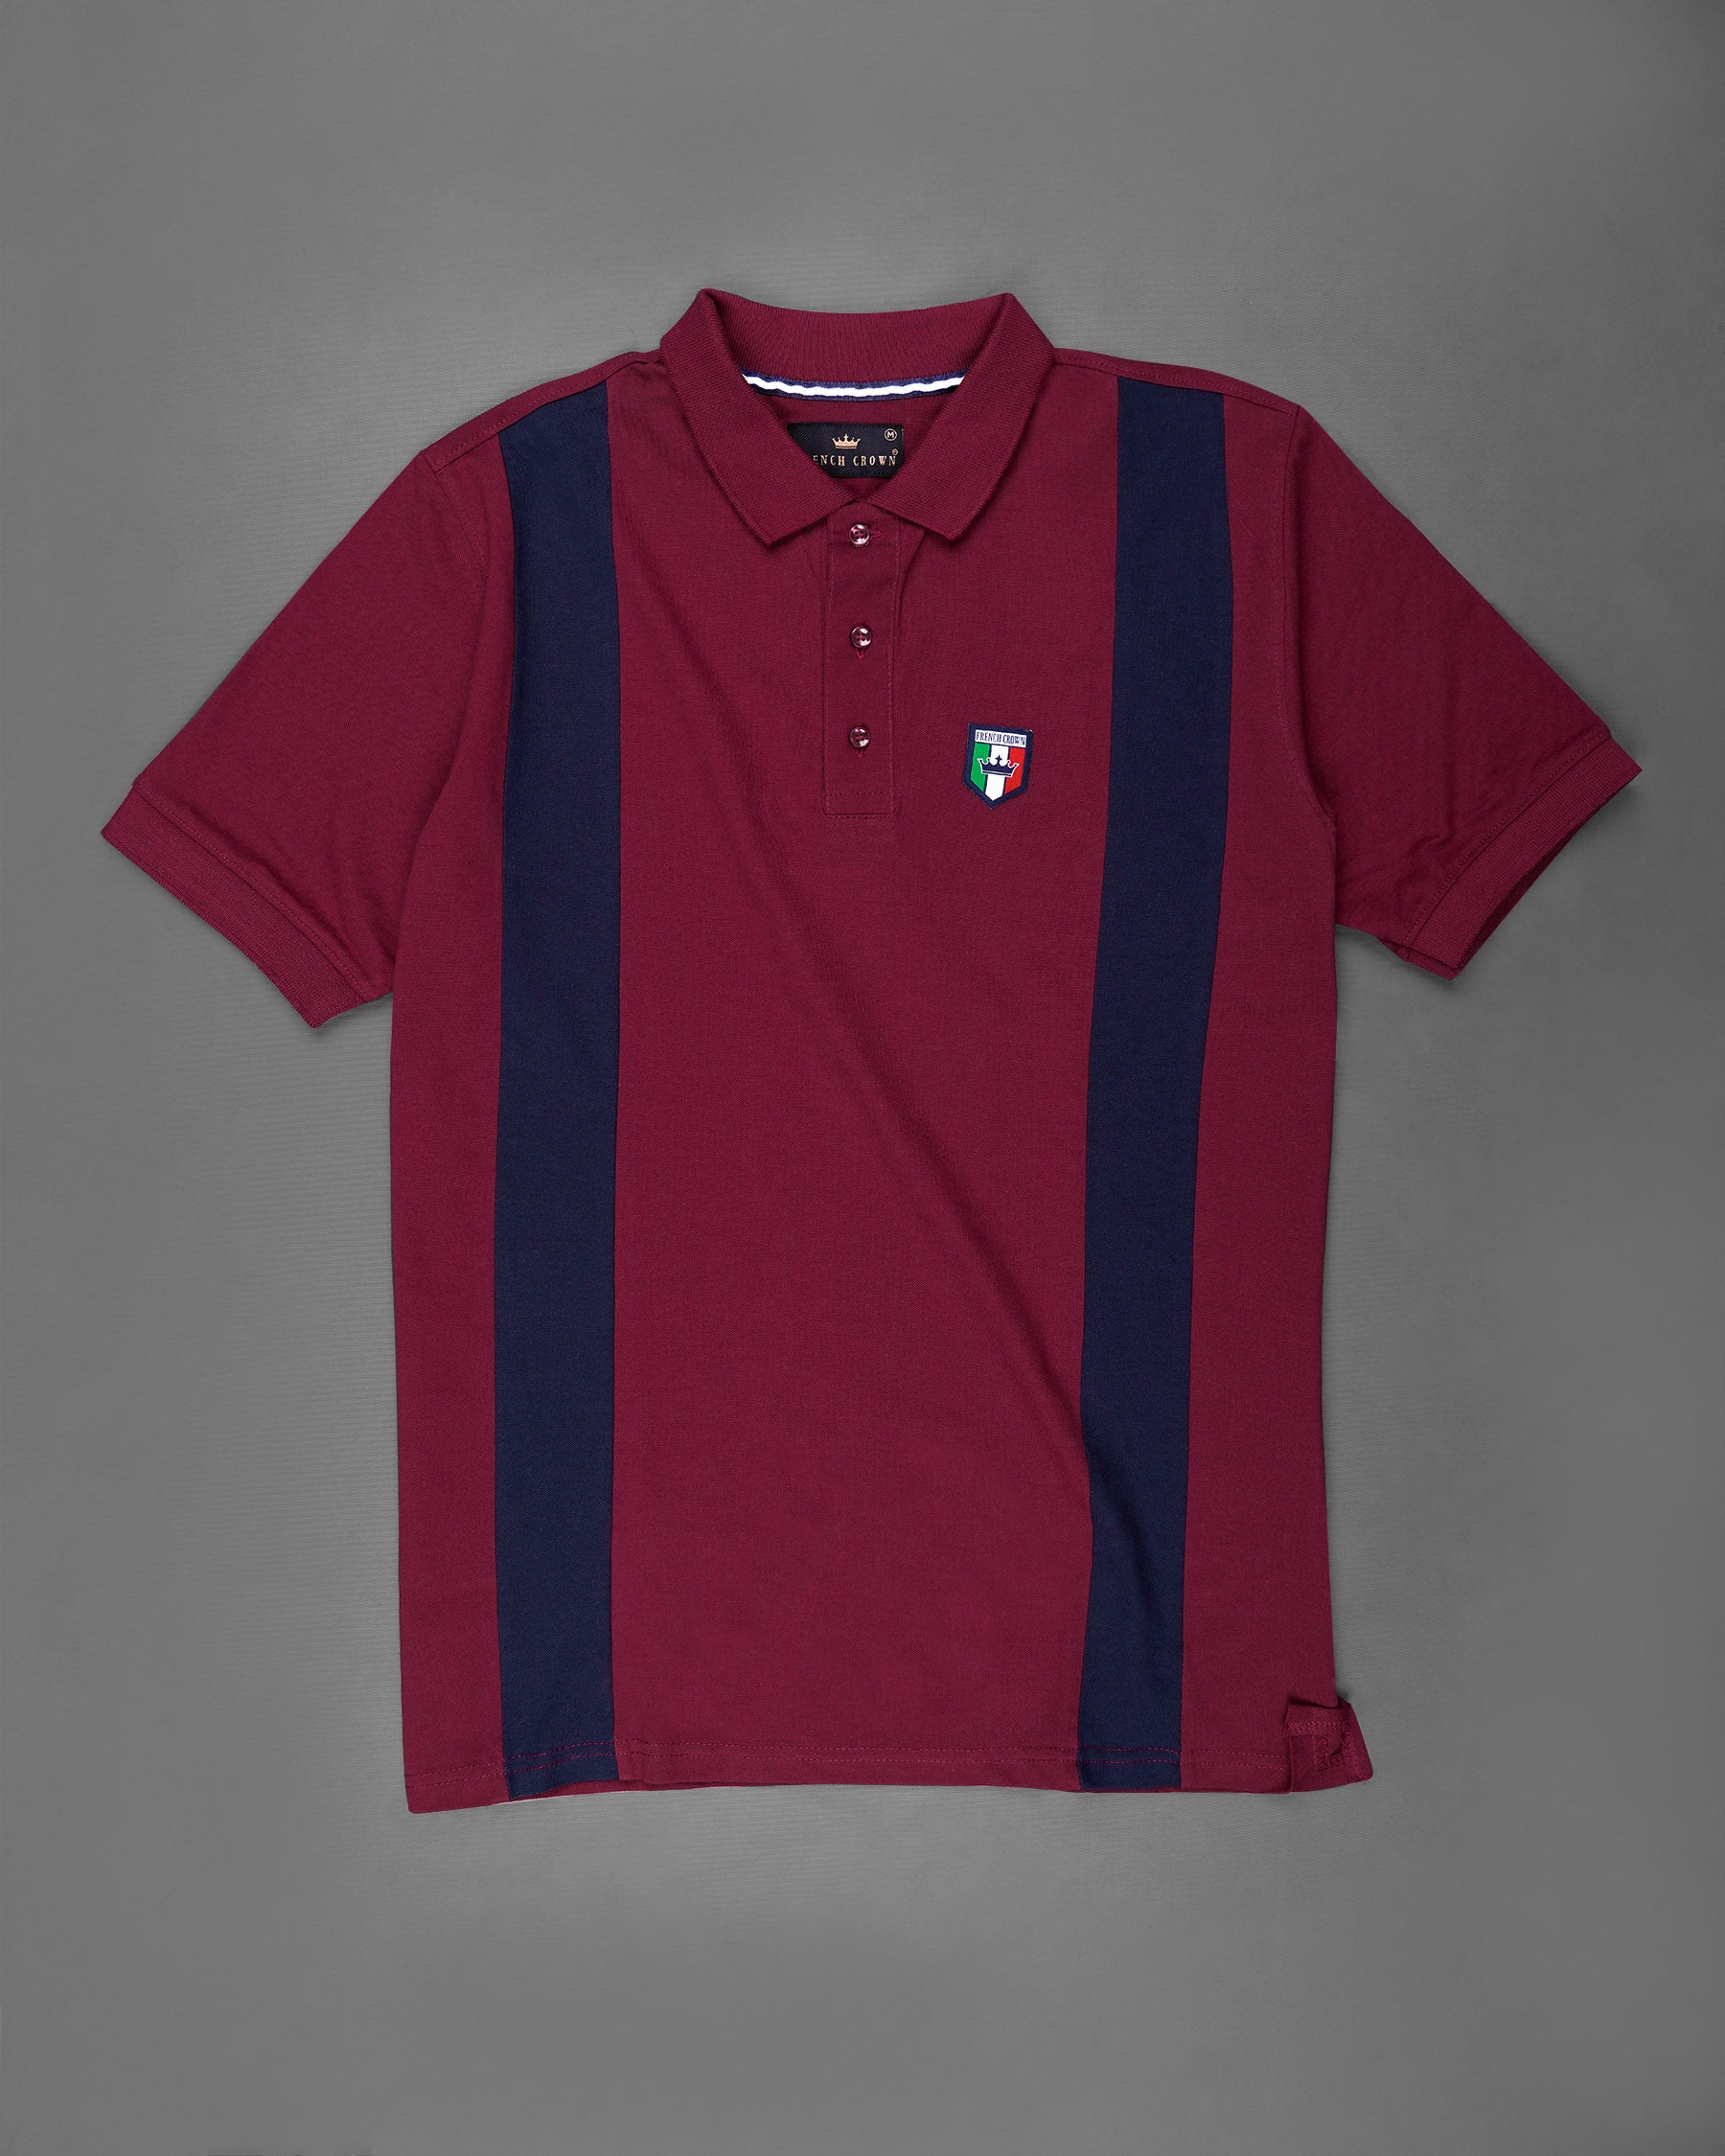 Mulberry Red and Haiti Blue Super Soft Pique Polo T Shirt TS542-S, TS542-M, TS542-L, TS542-XL, TS542-XXL, TS542-3XL, TS542-4XL